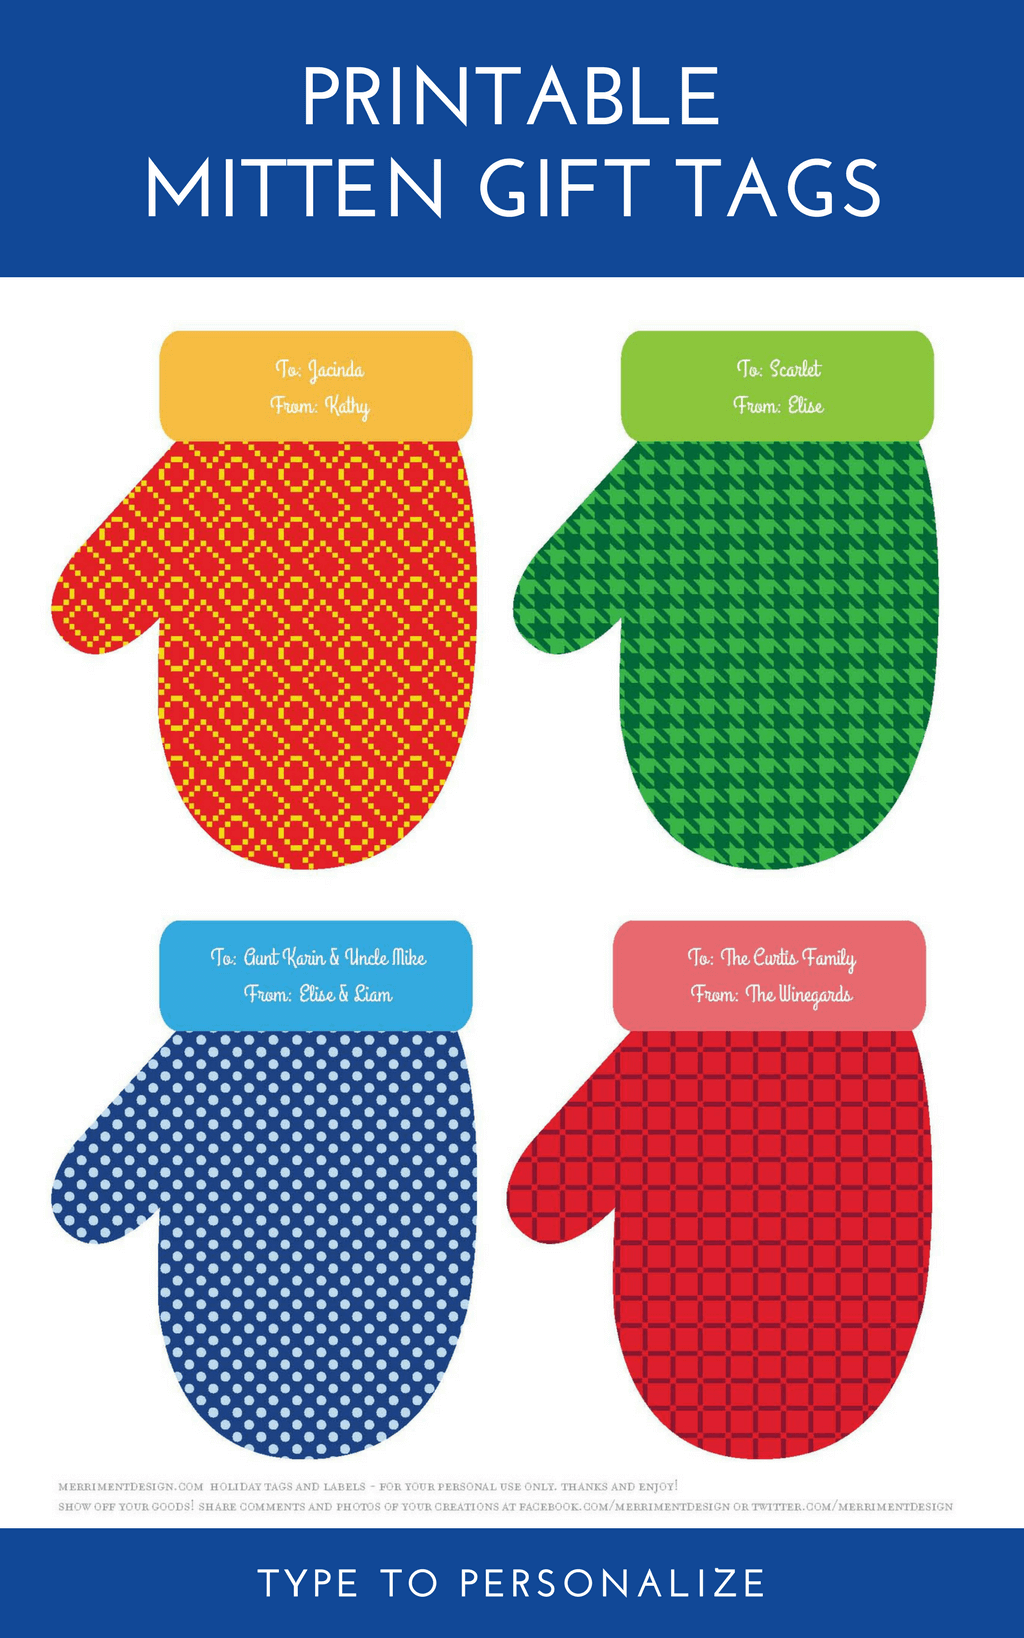 Mitten Printable Christmas gift tags - type to personalize the "to" and "from" #christmas #printable #diygifts #handmadechristmas #printables #handmadegift